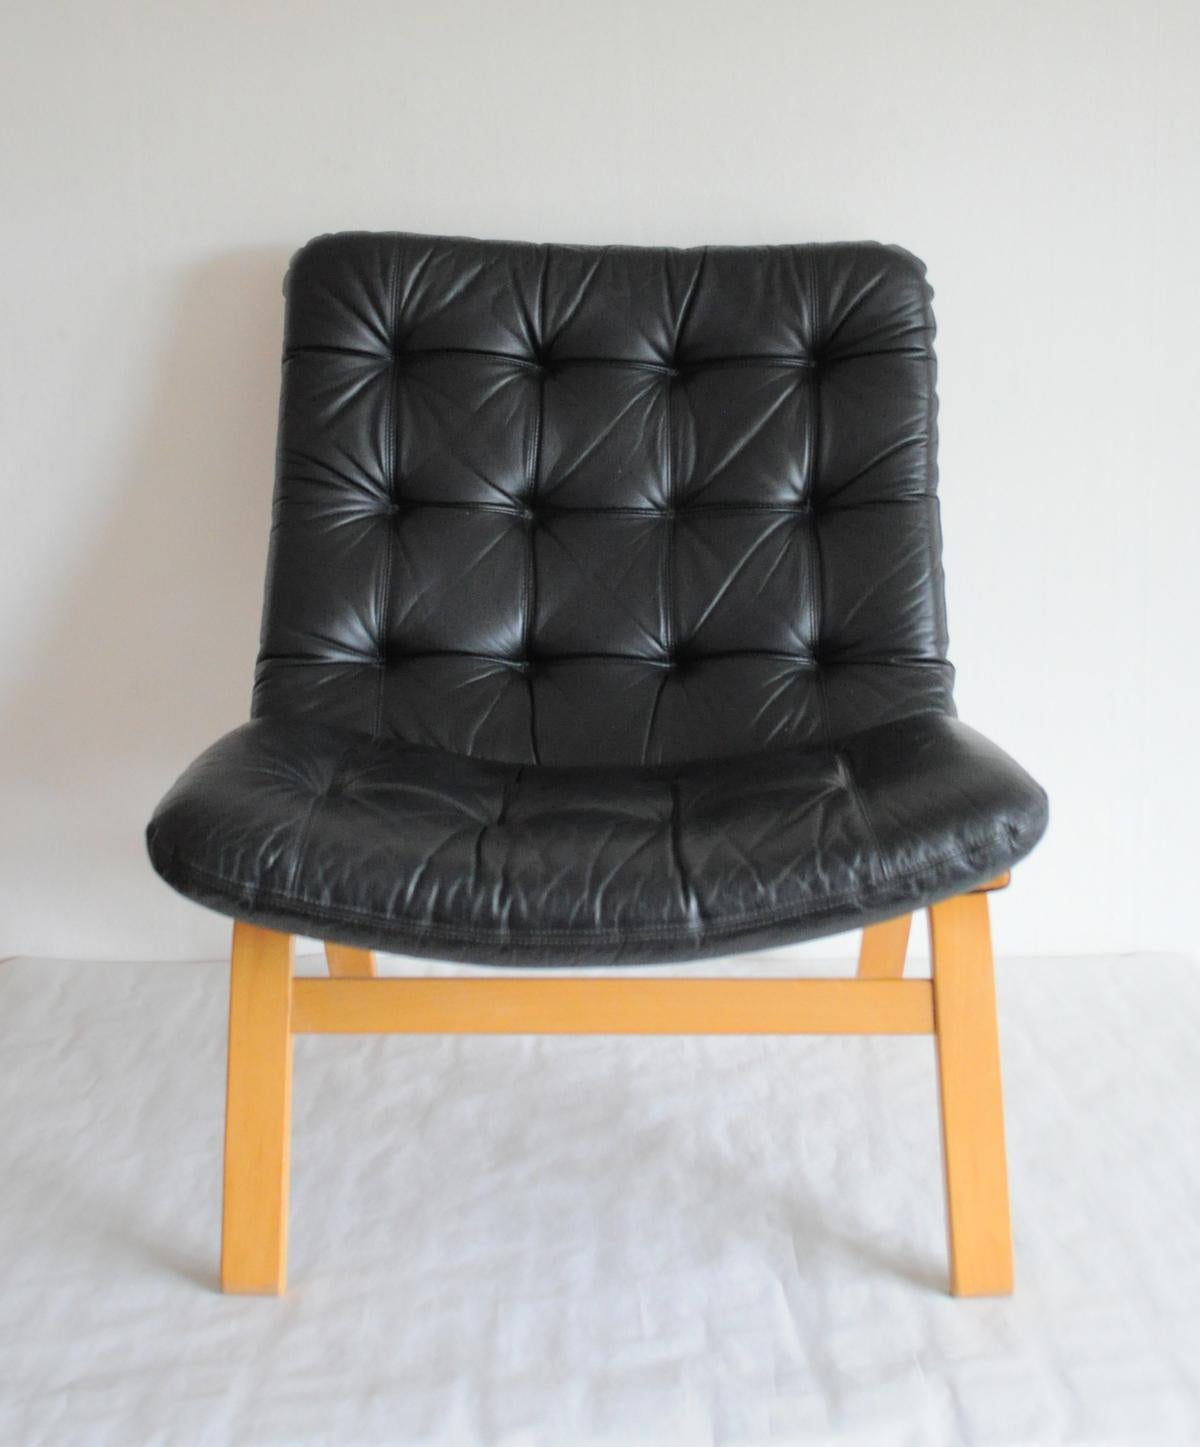 Black leather lounge chair. Leather upholstery in a fine condition. Frame in laminated beech. 
Good vintage condition. Patinated with signs of wear consistent with age and use.

Dimensions: W x D x H - 60 x 78 x 80 cm.
Seat height: 40.

Can be